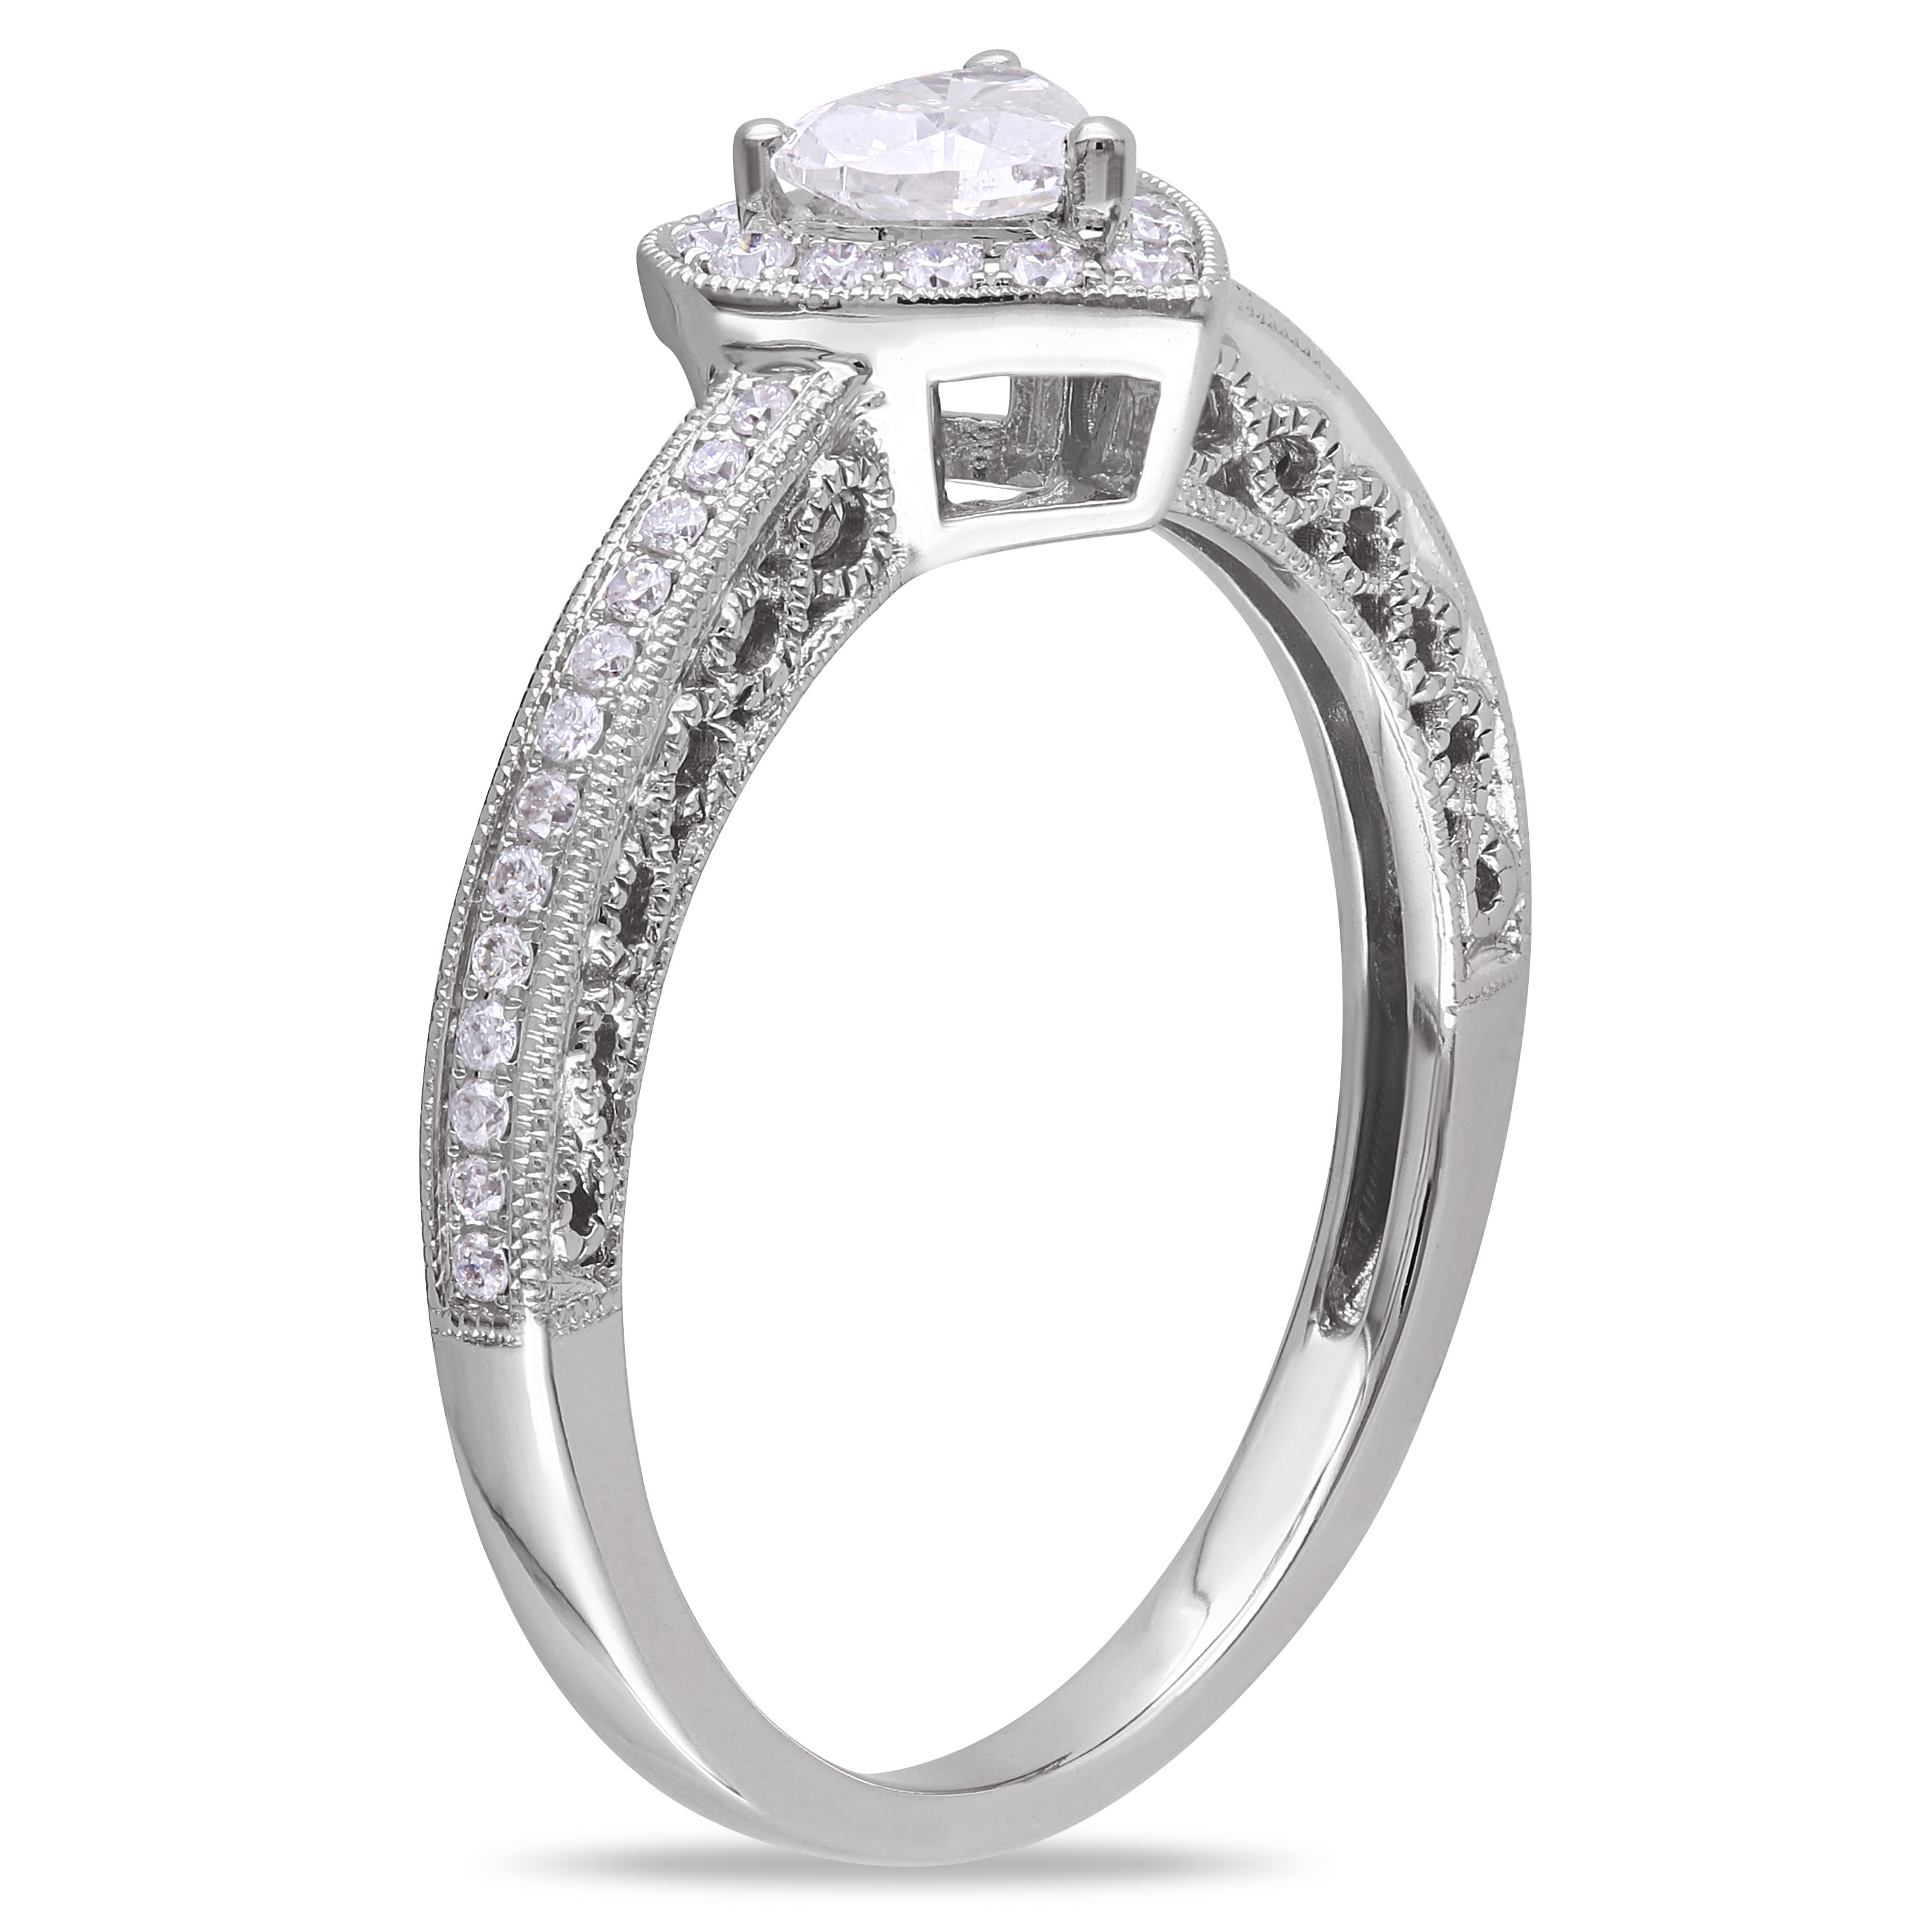 1/2 CT TW Halo Heart Diamond Engagement Ring in 14k White Gold